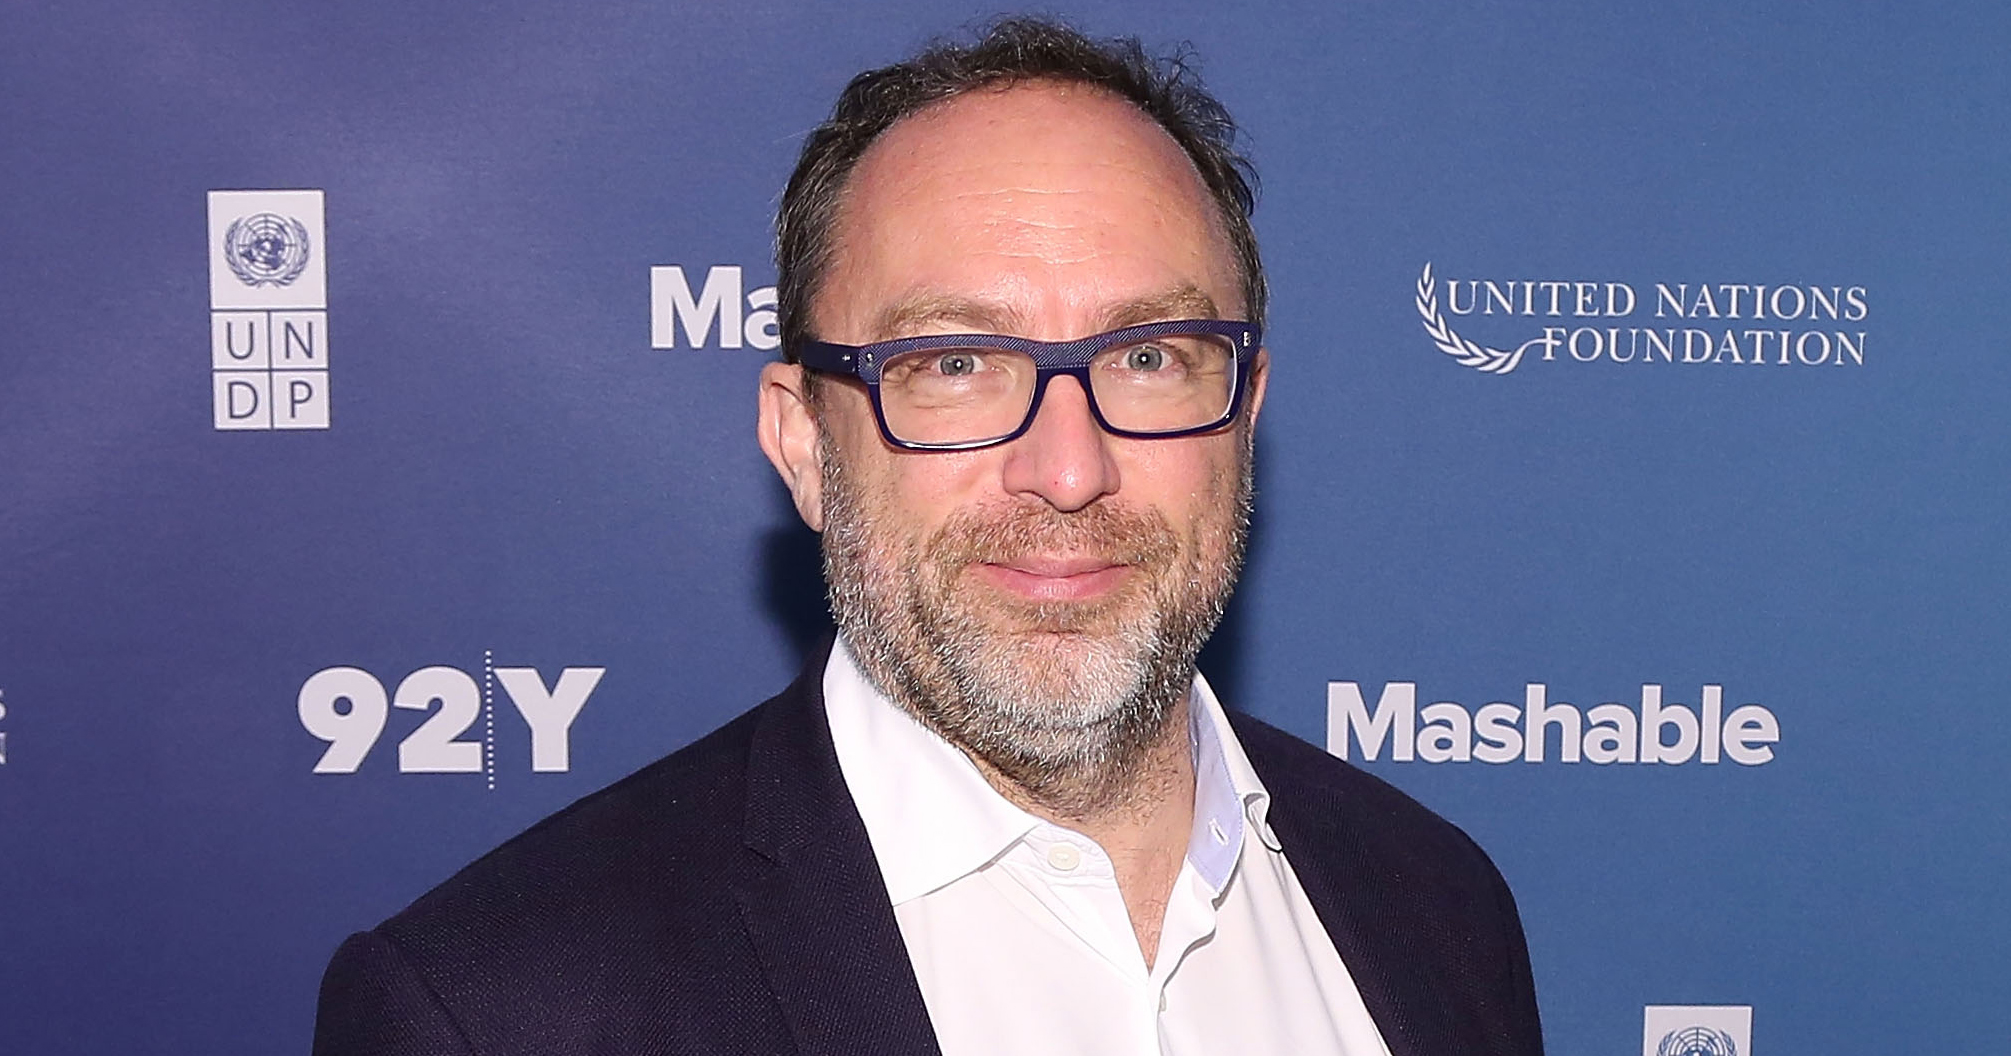 Wikipedia founder Jimmy Wales is seen on Sept. 27, 2015 in New York City.